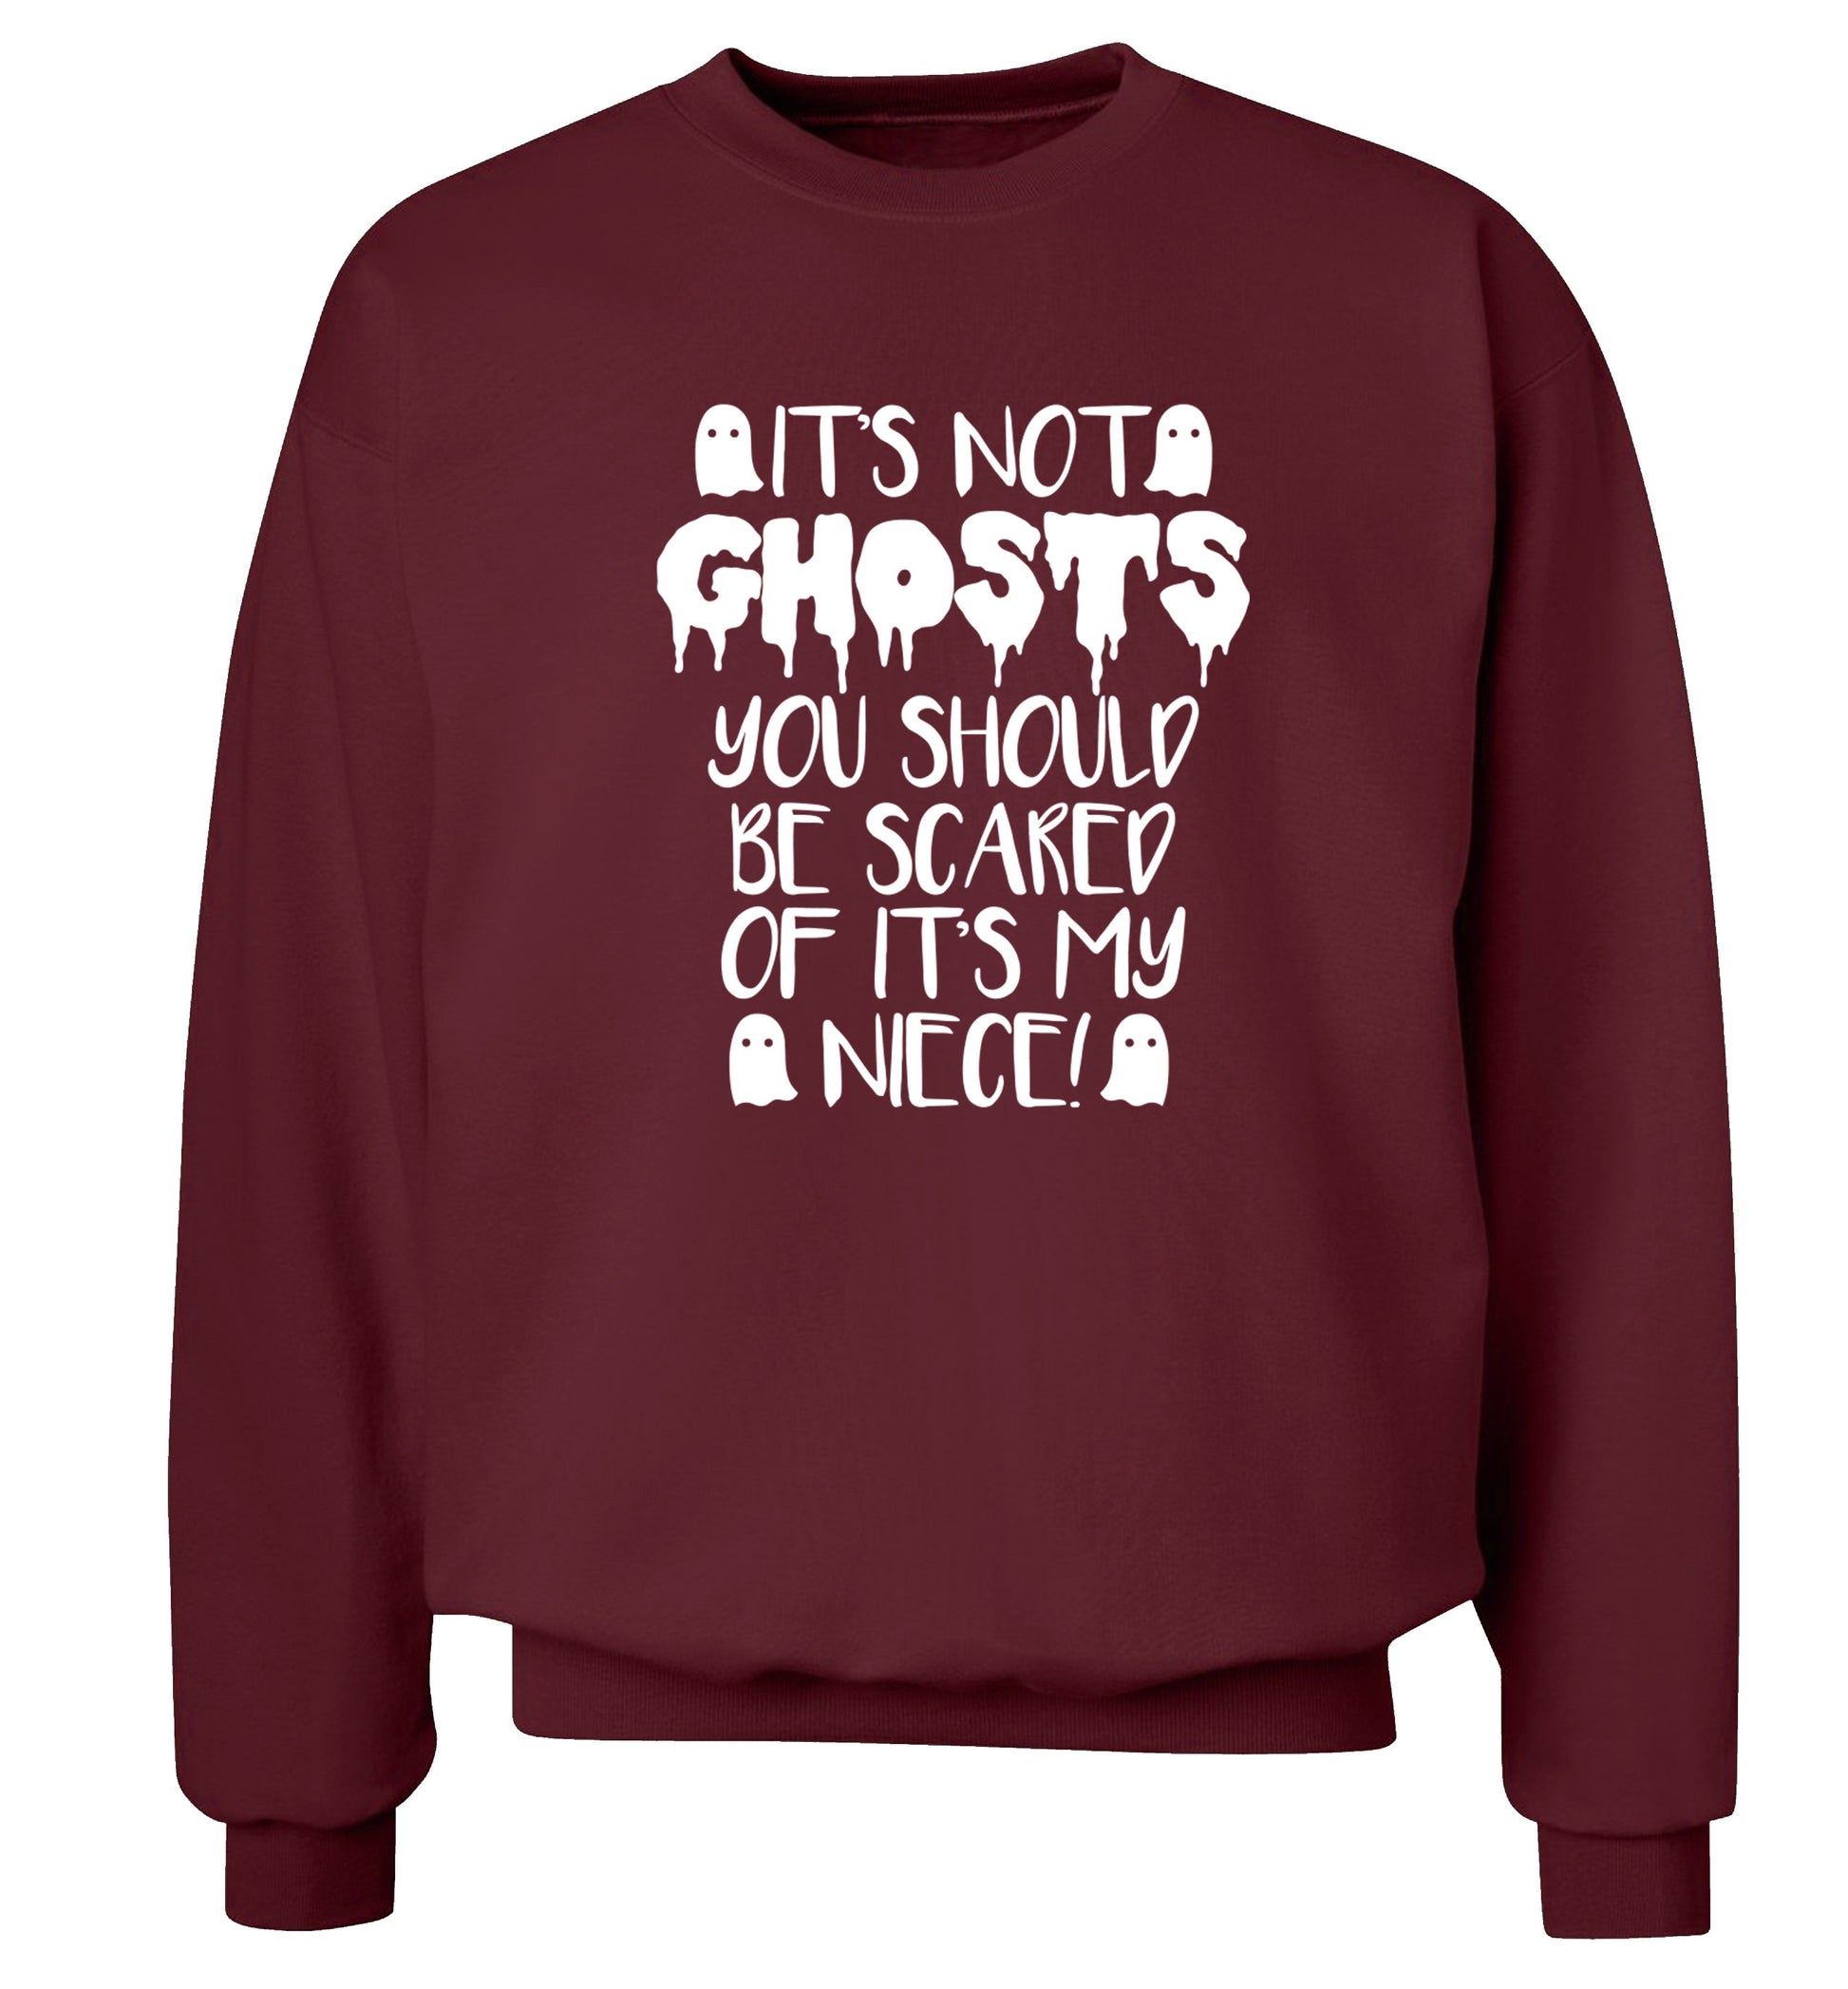 It's not ghosts you should be scared of it's my niece! Adult's unisex maroon Sweater 2XL